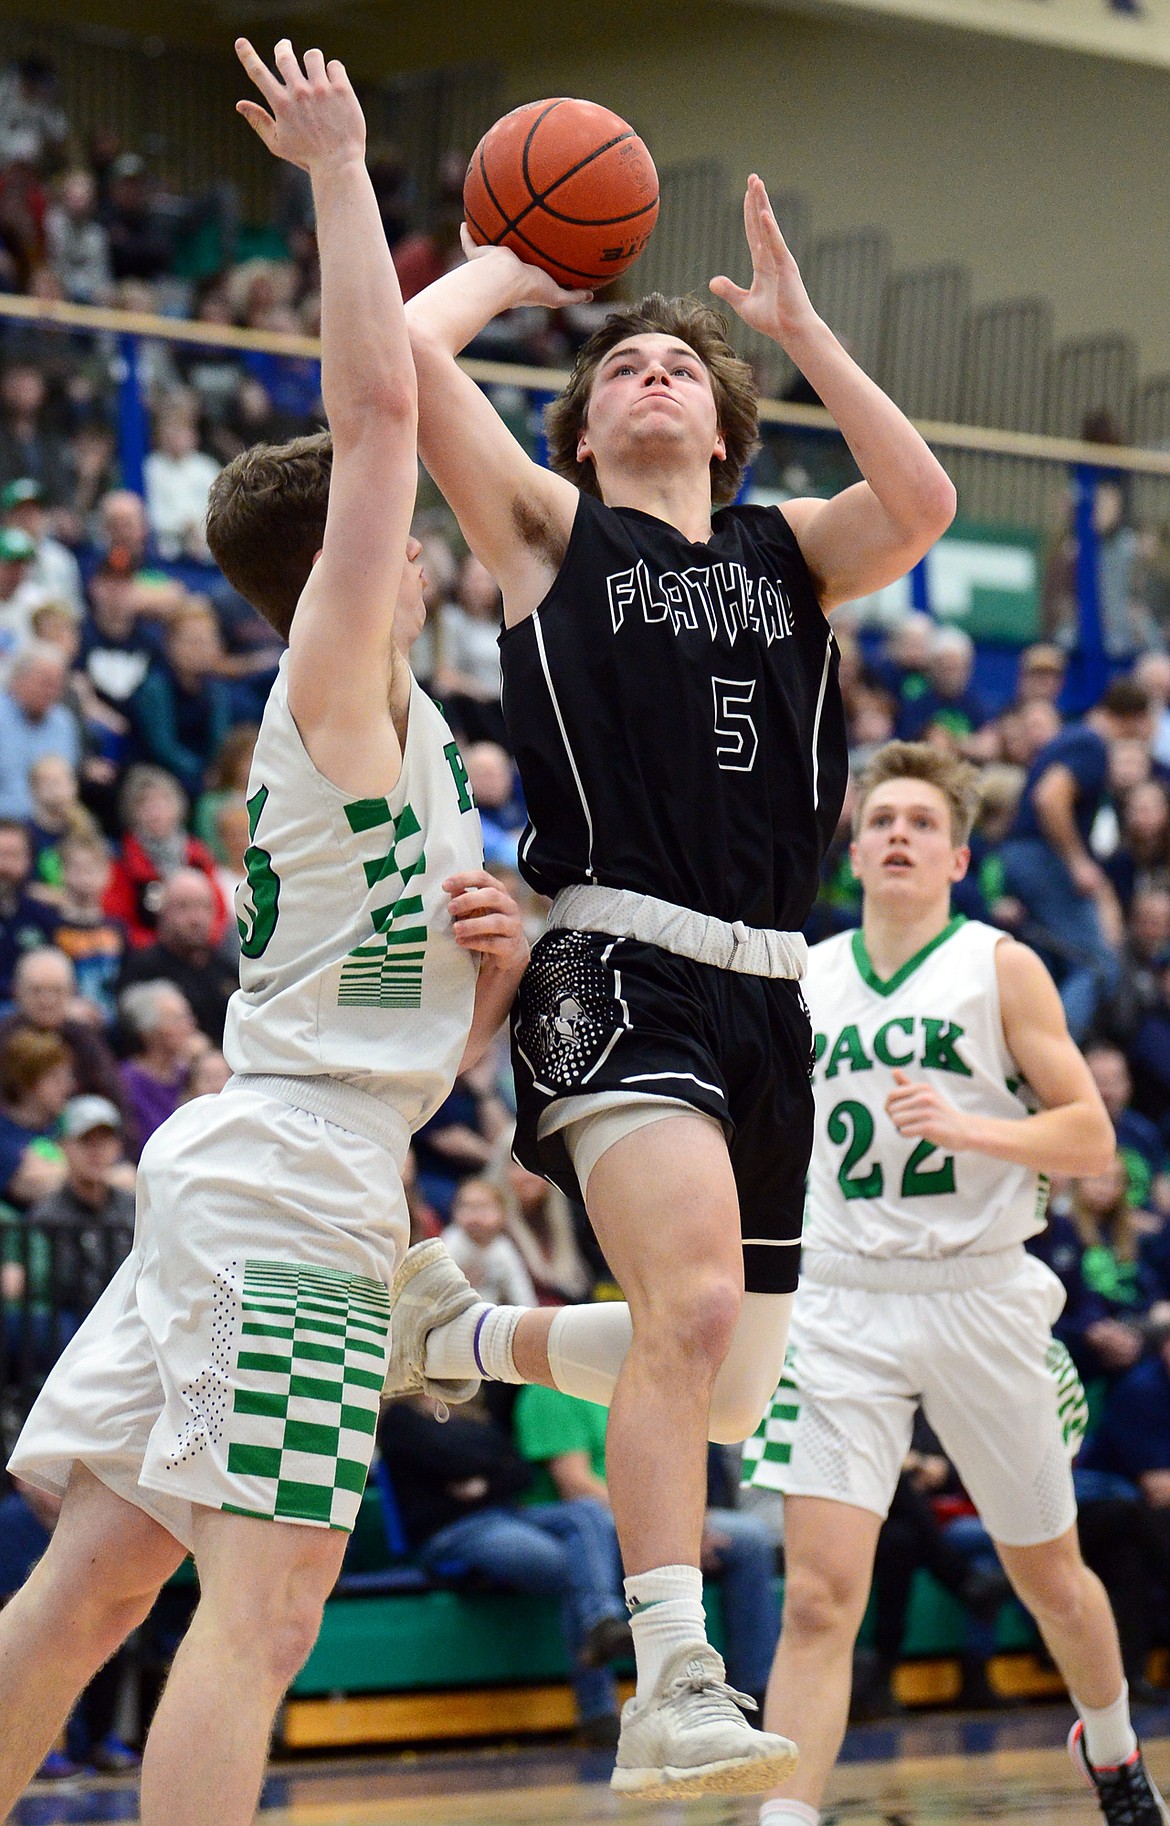 Flathead's Tannen Beyl (5) drives to the hoop against Glacier's Drew Engellant (15) during a crosstown matchup at Glacier High School on Friday. (Casey Kreider/Daily Inter Lake)